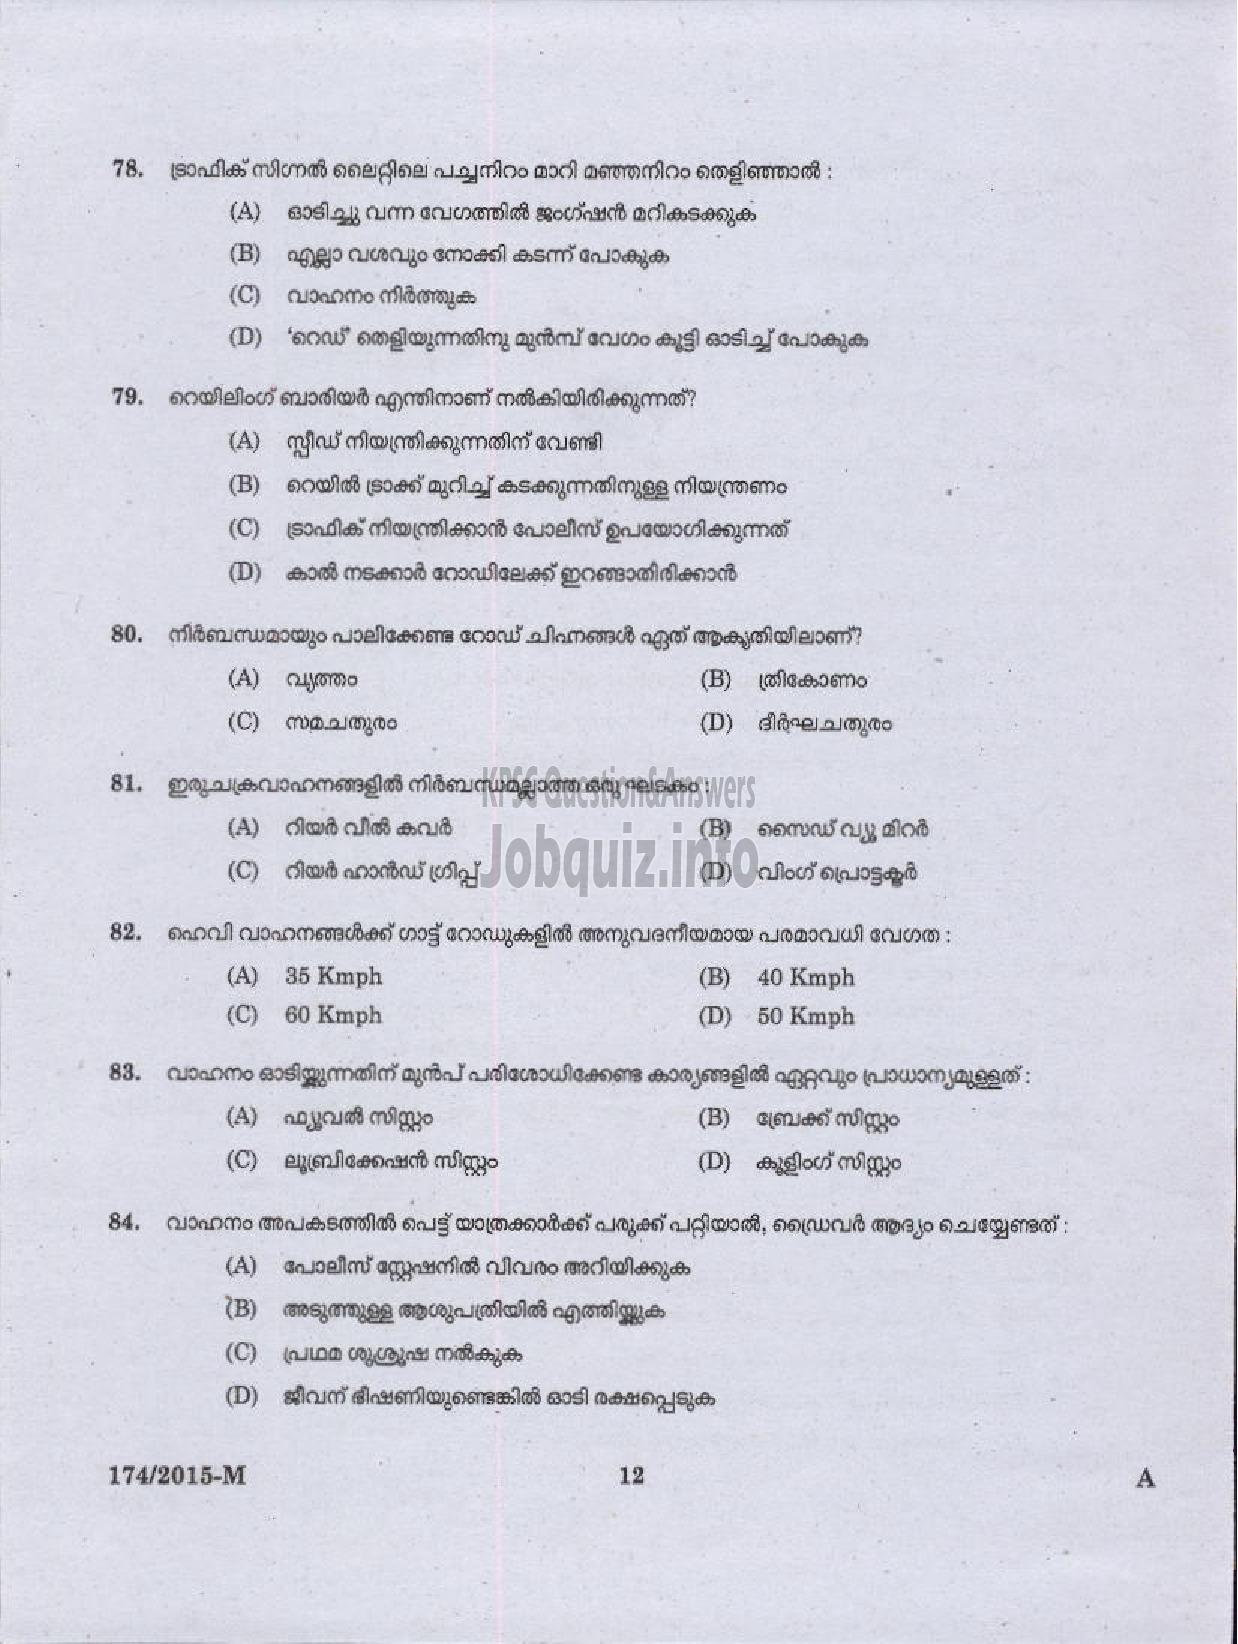 Kerala PSC Question Paper - DRIVER GRADE GR II HDV VARIOUS/EXCISE ( Malayalam ) -10